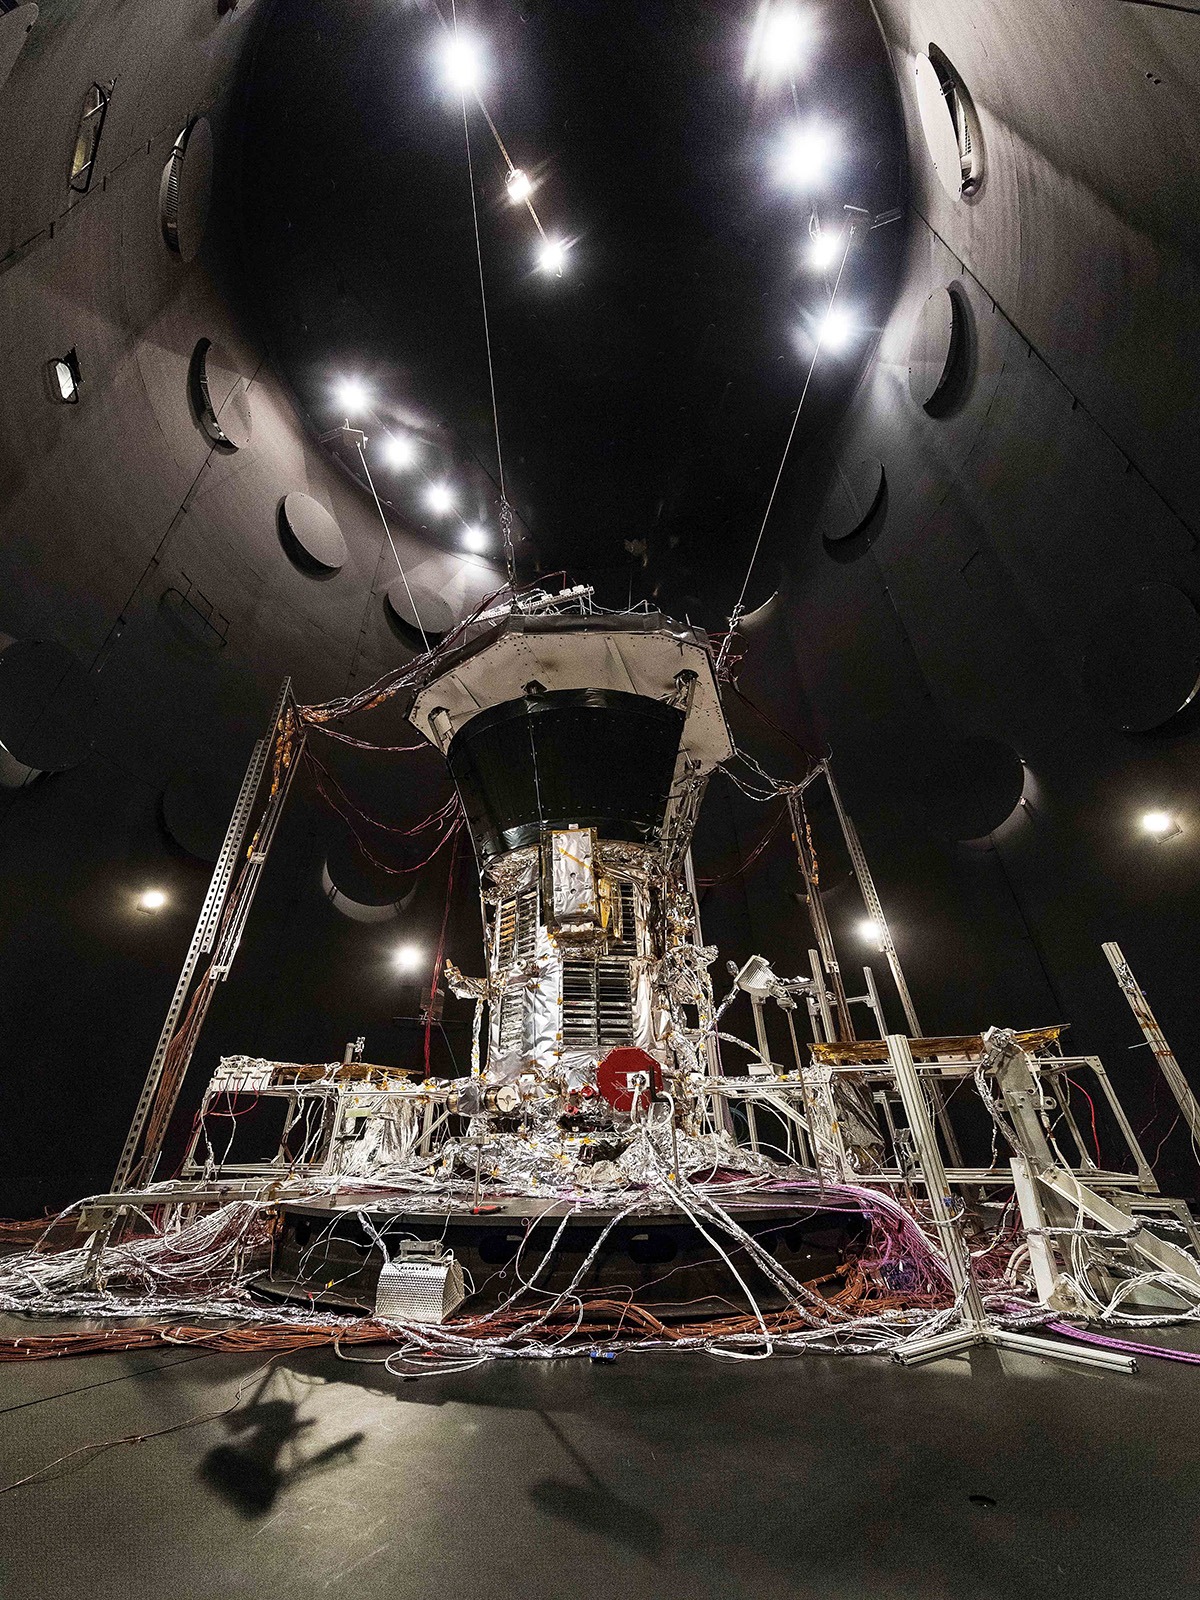 NASA’s Parker Solar Probe sits inside the thermal vacuum chamber at NASA’s Goddard Space Flight Center. On Jan. 27, the spacecraft began space environment testing inside the chamber, which simulates the hot and cold airless environments that the mission will experience during its mission to the Sun. 